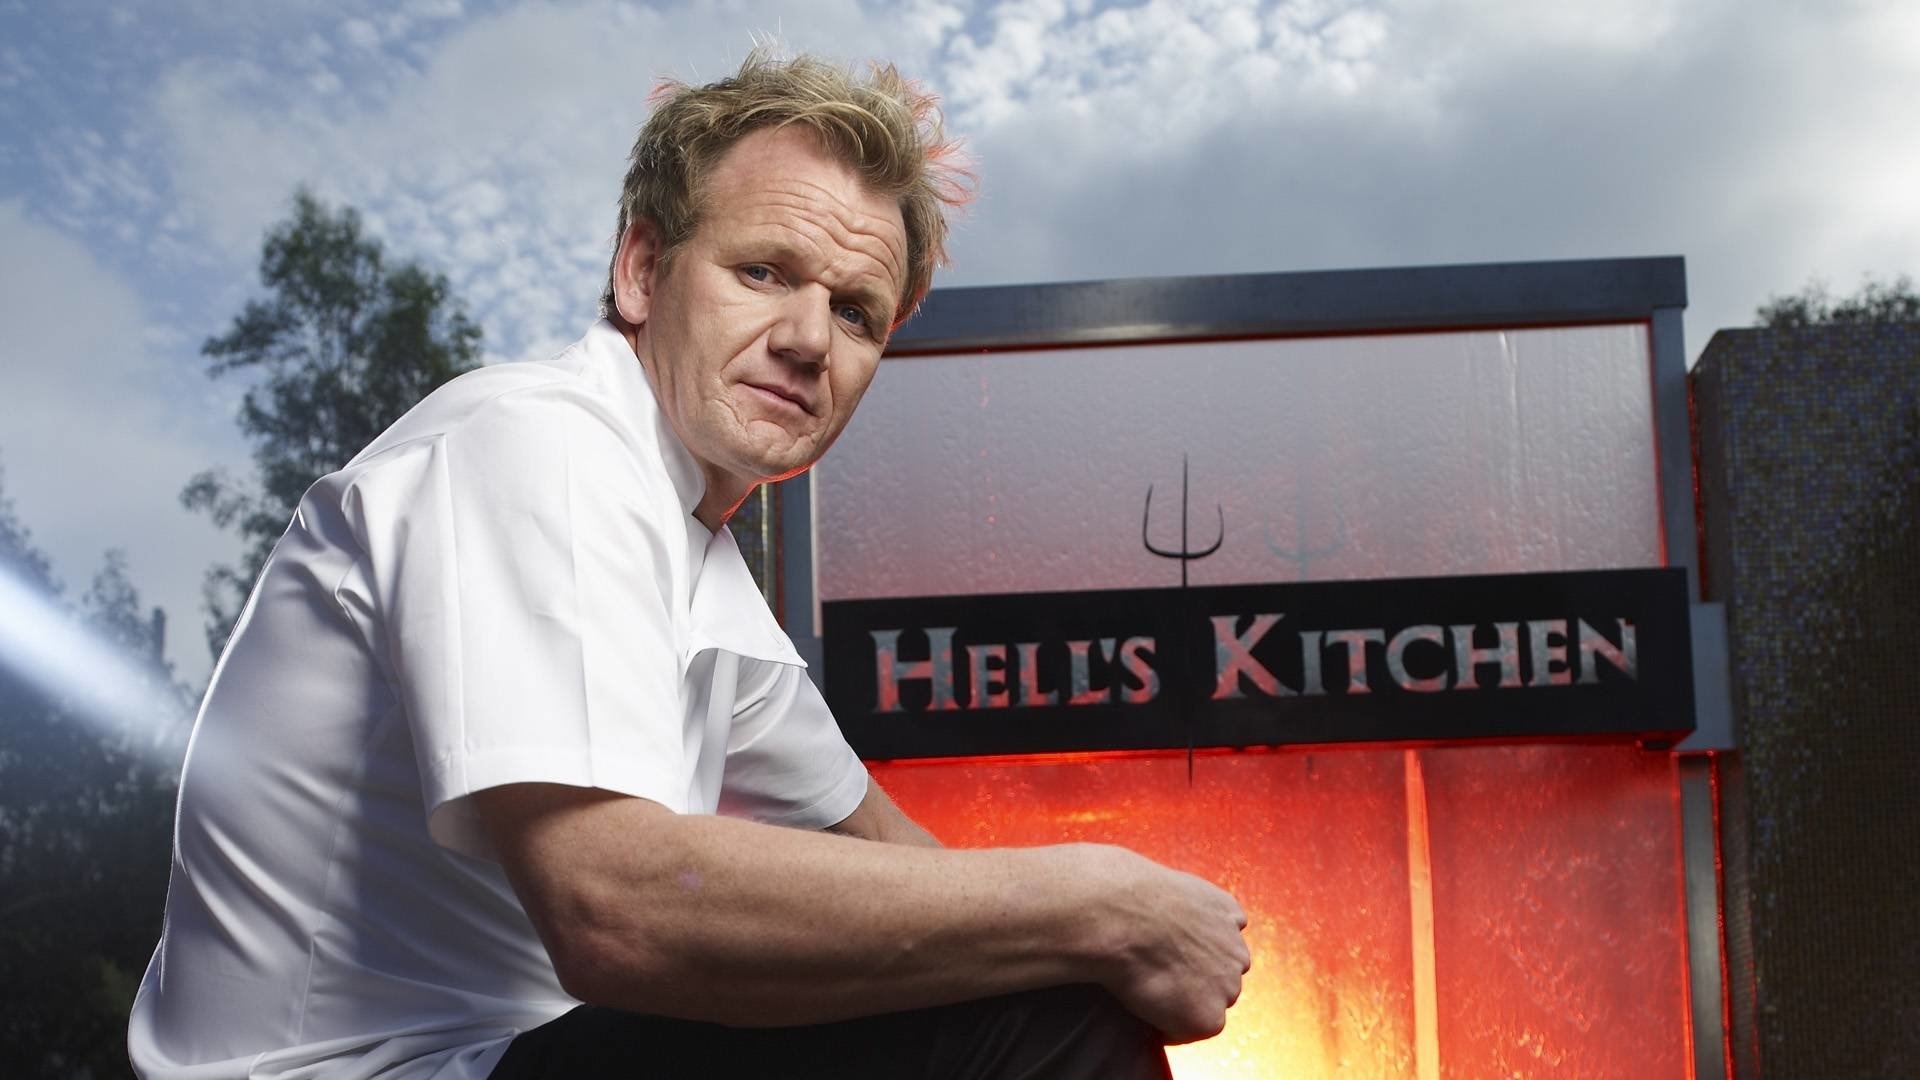 Gordon Ramsay: Hosted several cooking shows such as "Hell's Kitchen" and "MasterChef". 1920x1080 Full HD Background.